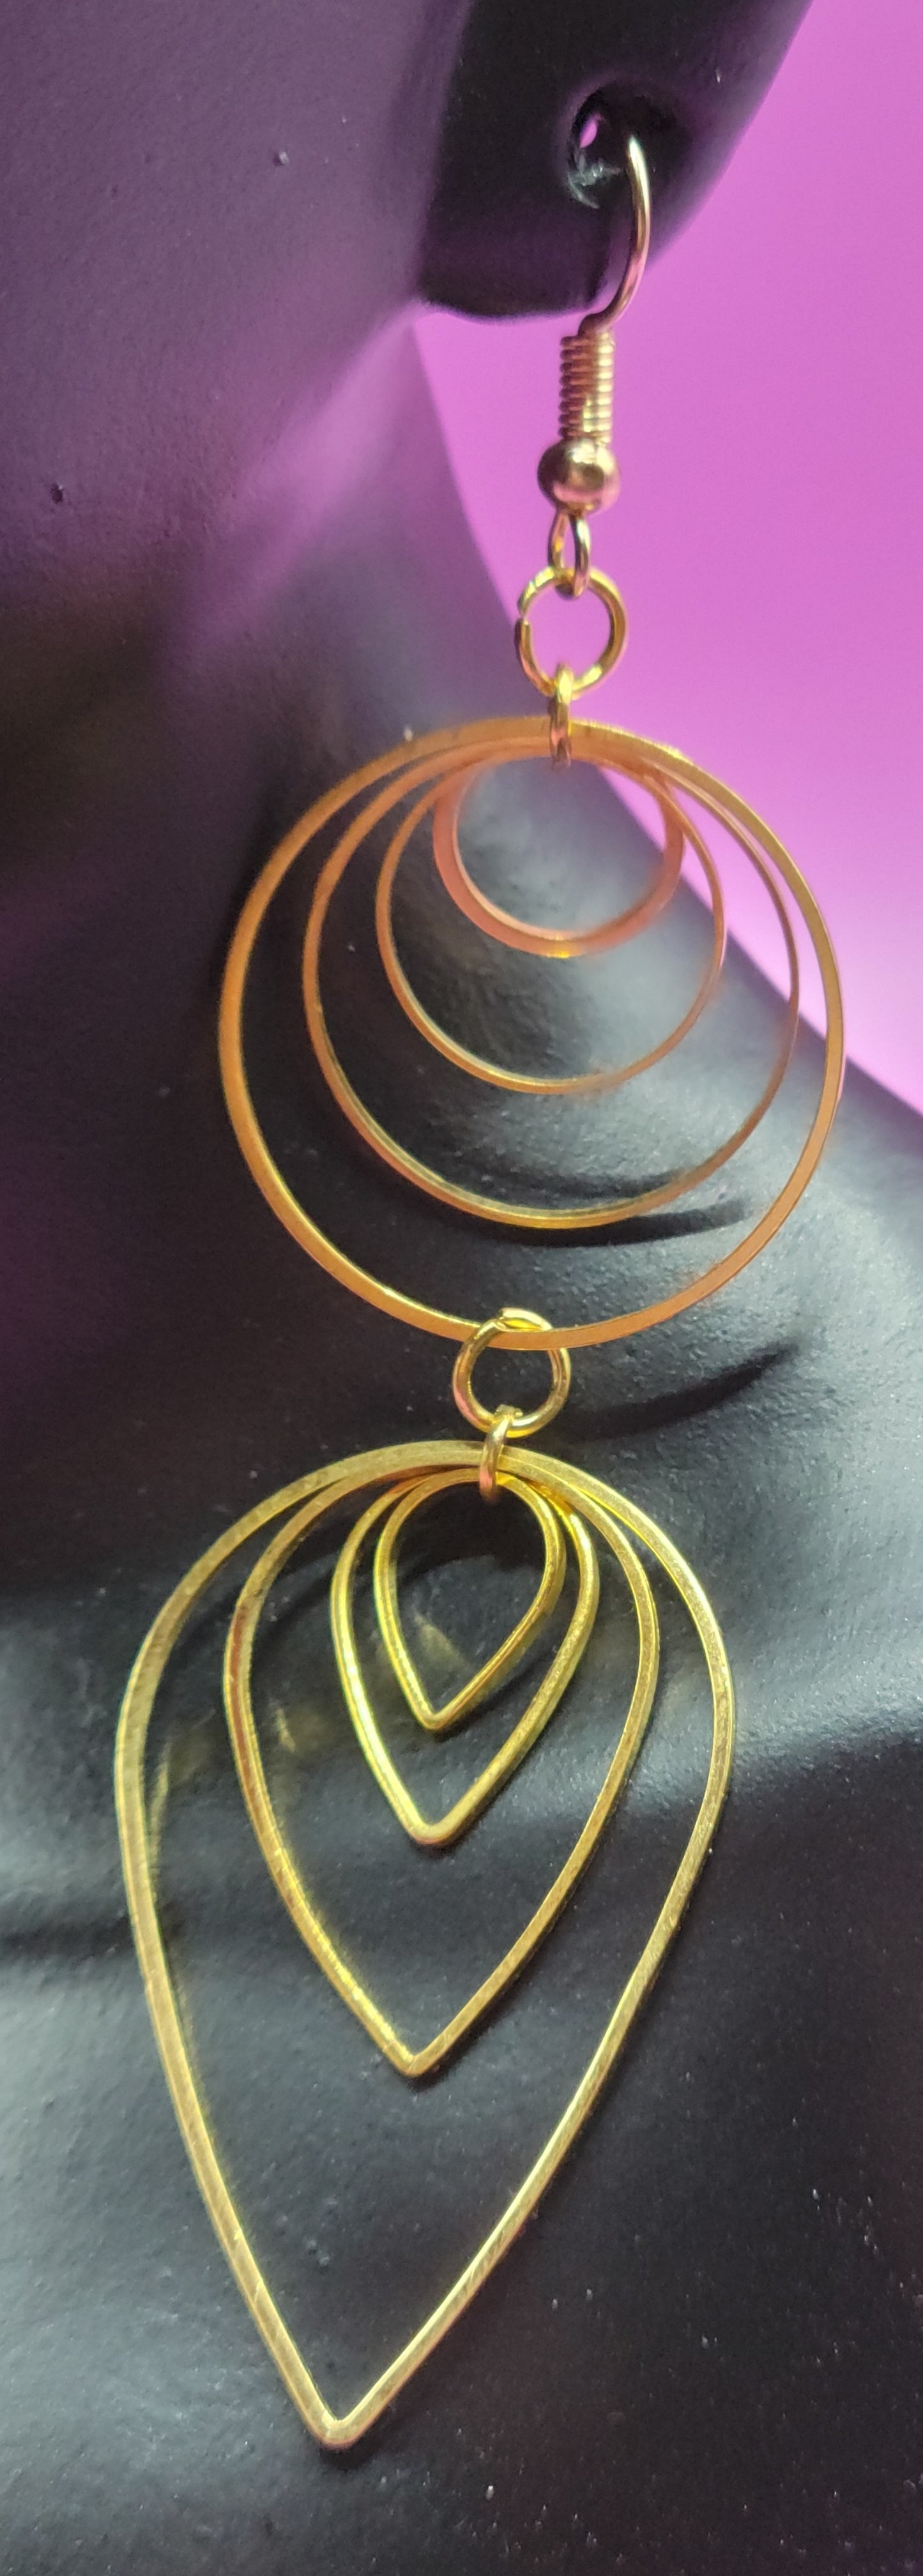 Gold layered earrings